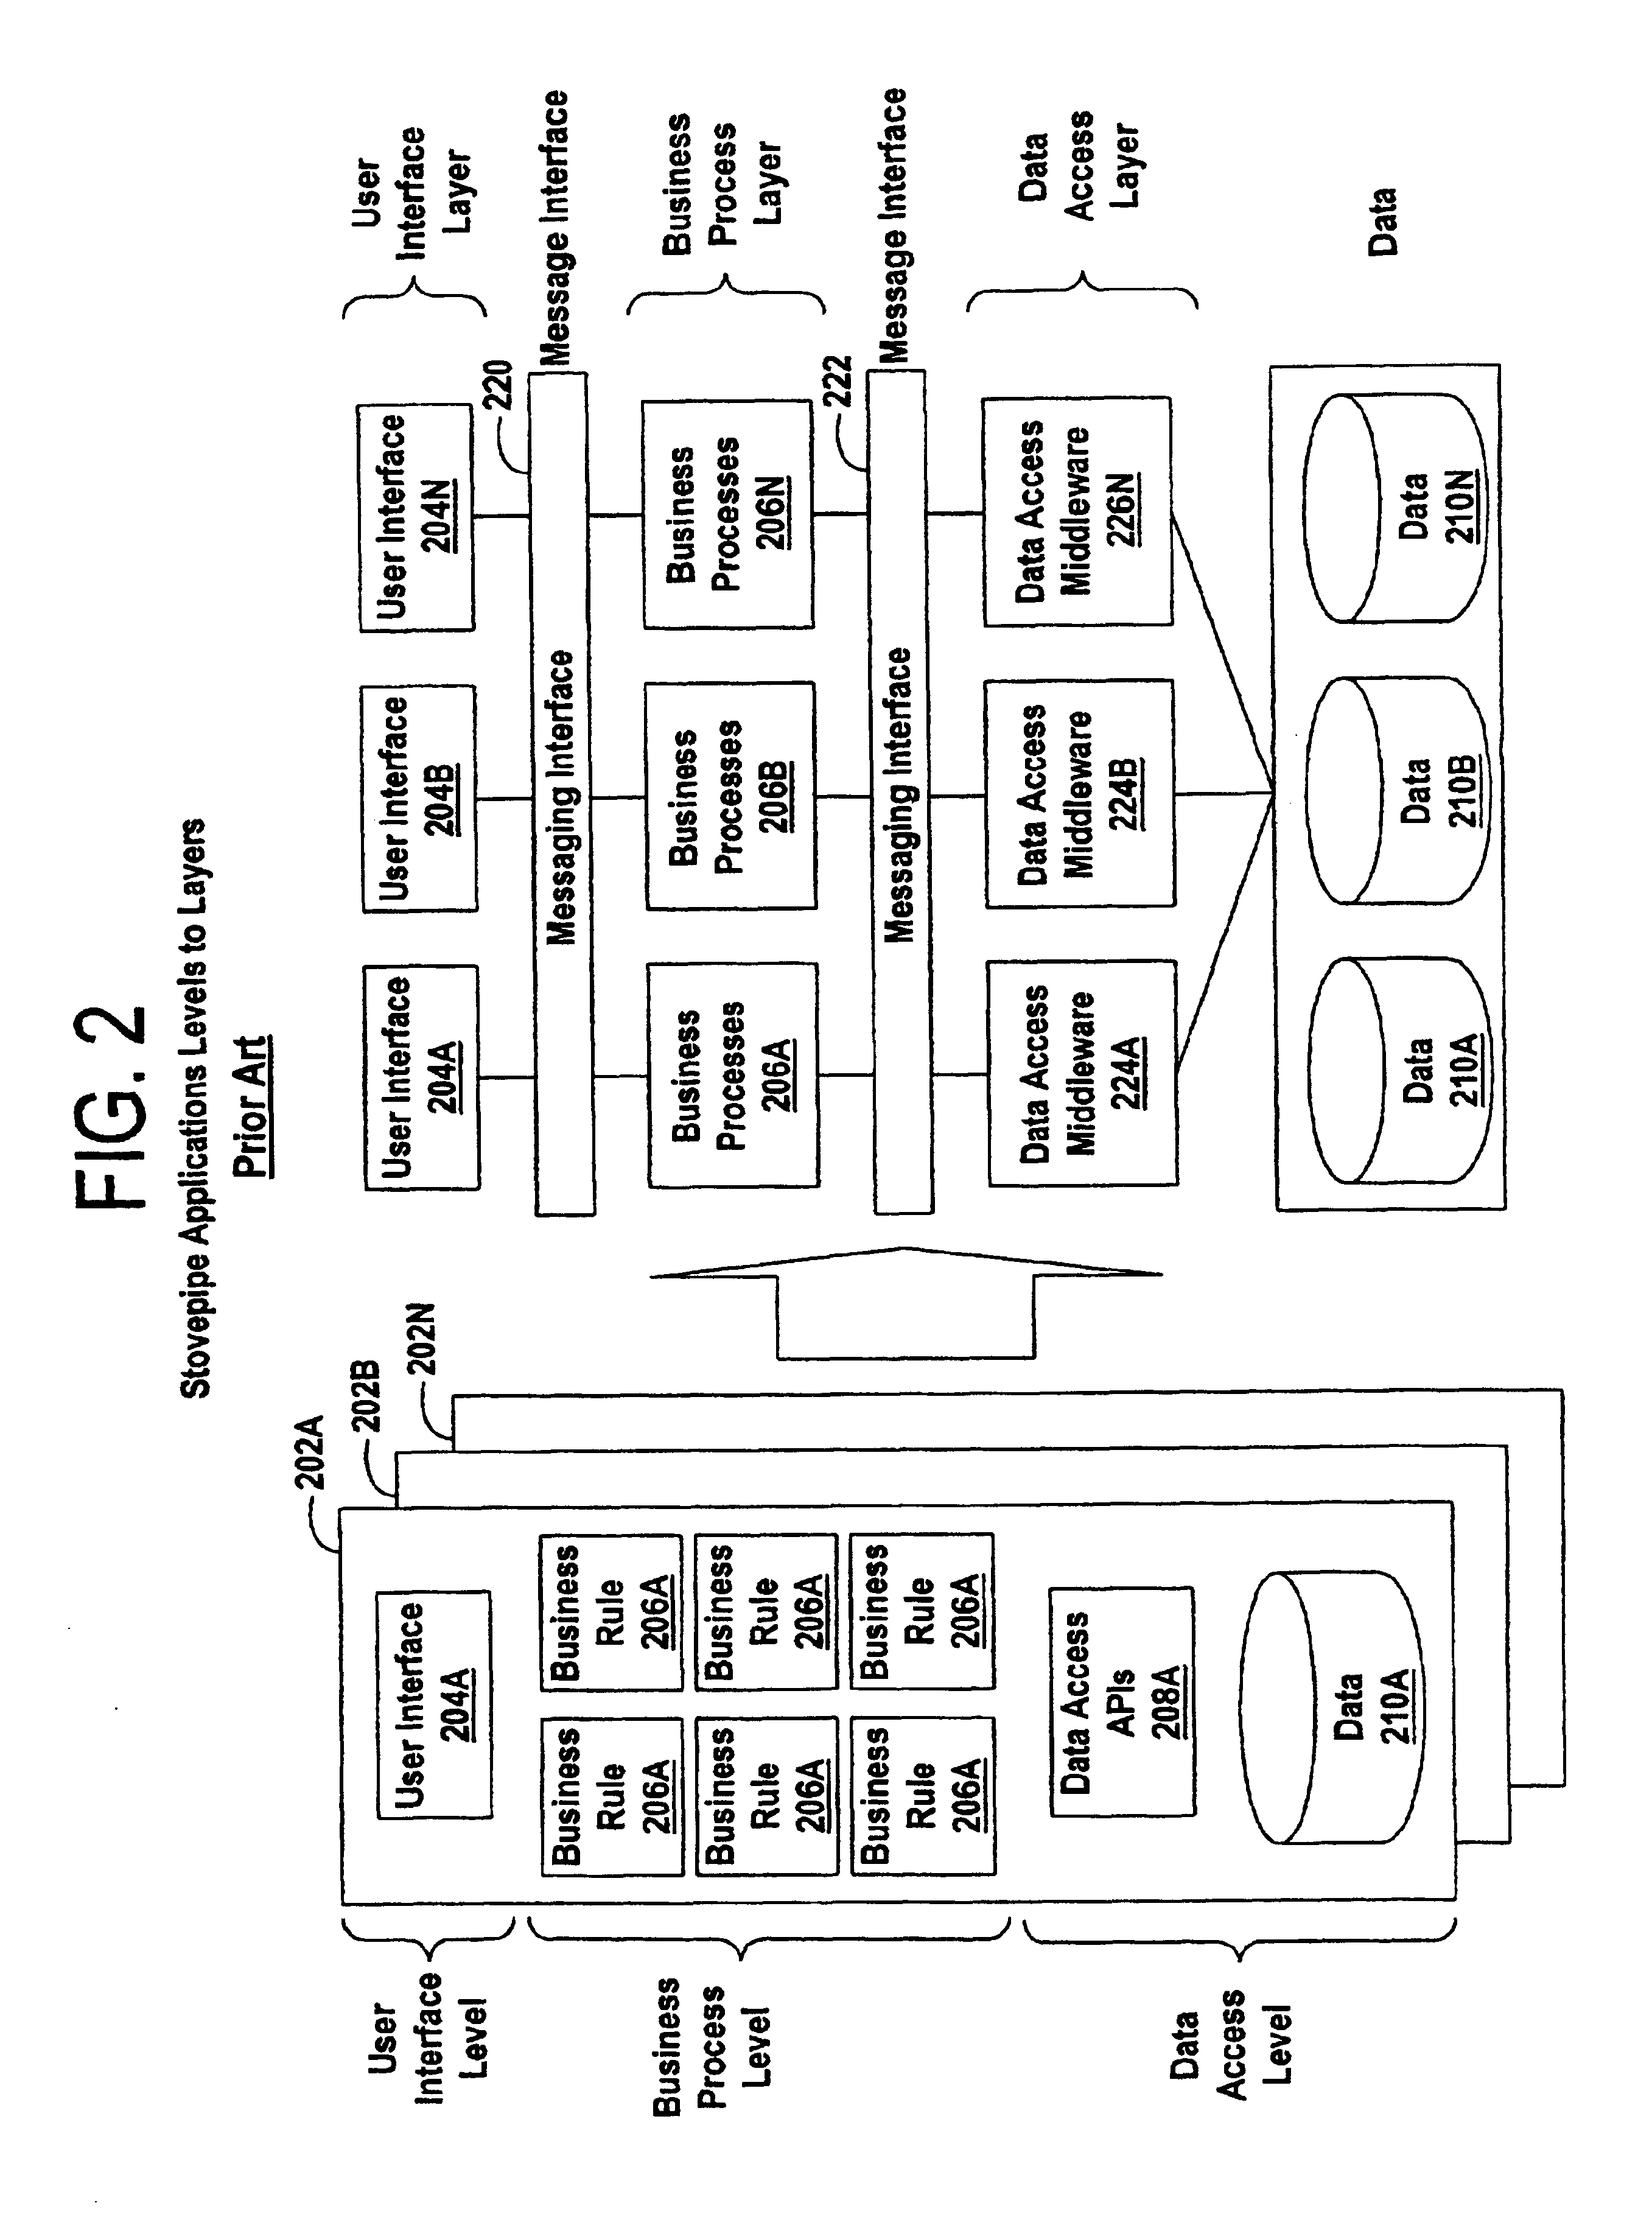 Method and system for managing partitioned data resources